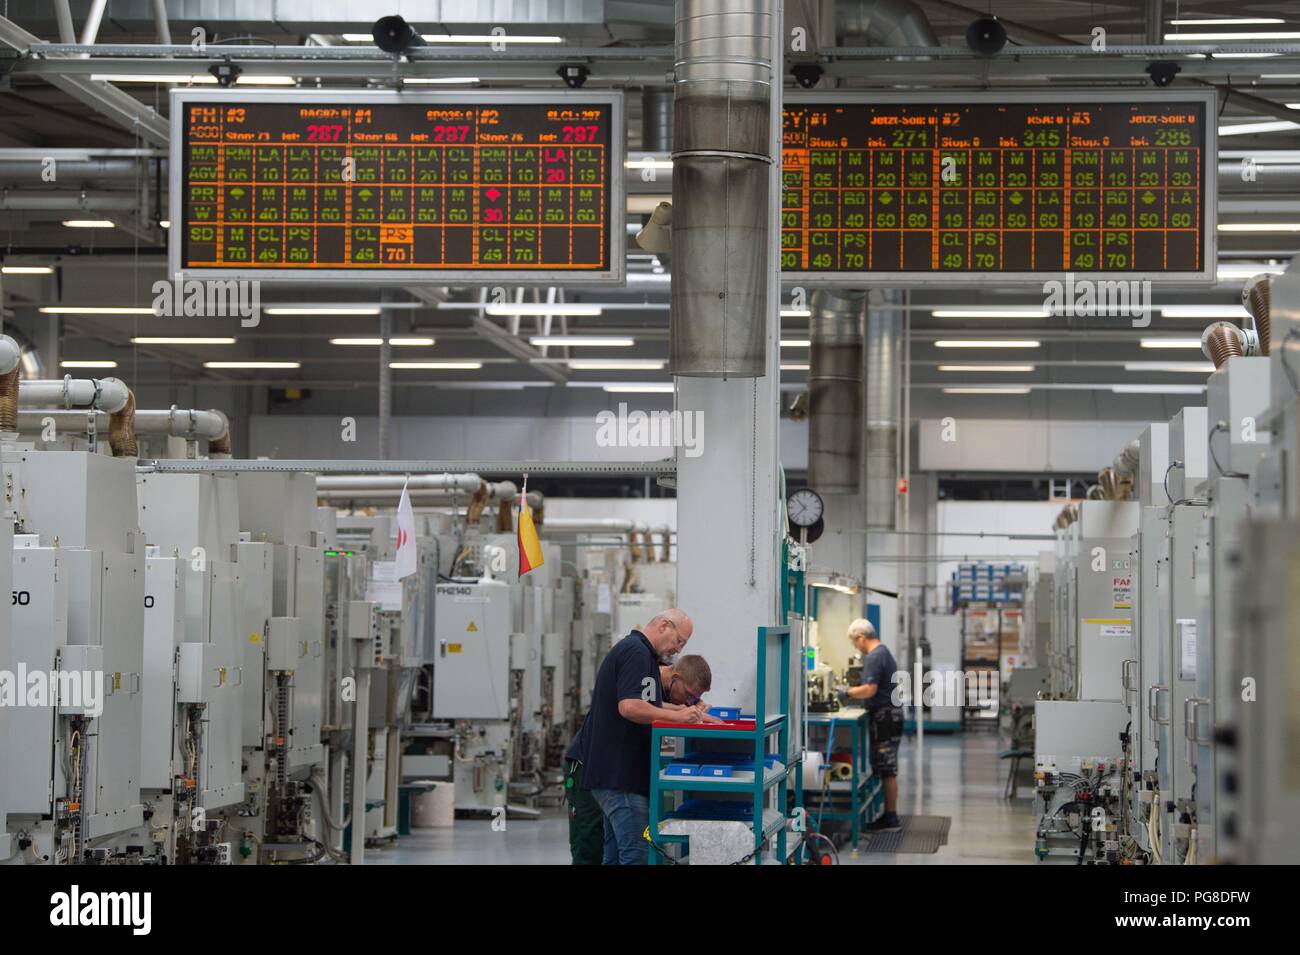 https://c8.alamy.com/comp/PG8DFW/bernsdorf-germany-24th-aug-2018-workers-at-td-deutsche-klimakompressor-gmbh-tddk-are-standing-in-a-production-hall-on-the-same-day-the-50-millionth-compressor-was-handed-over-at-the-production-line-tddk-is-a-company-of-the-two-japanese-automotive-suppliers-toyota-industries-corporation-and-denso-corporation-credit-sebastian-kahnertdpa-zentralbilddpaalamy-live-news-PG8DFW.jpg